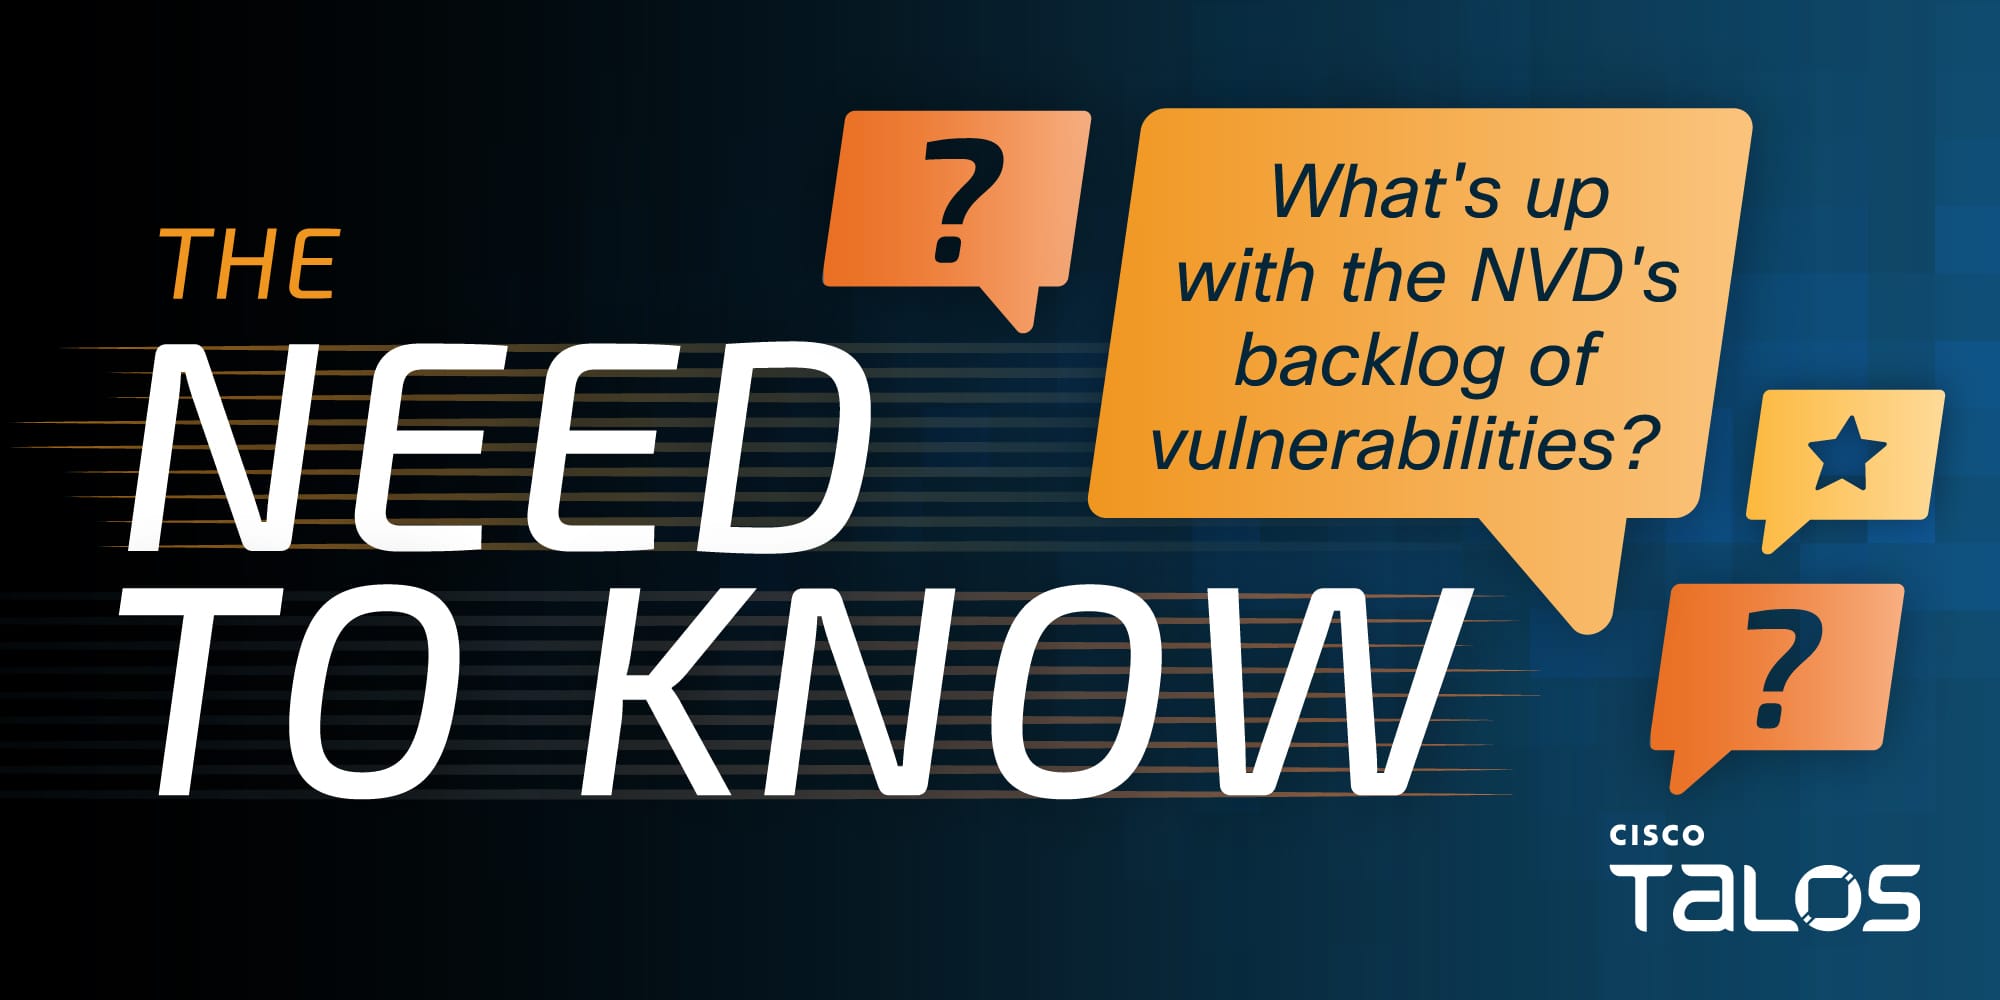 What’s the deal with the massive backlog of vulnerabilities at the NVD?